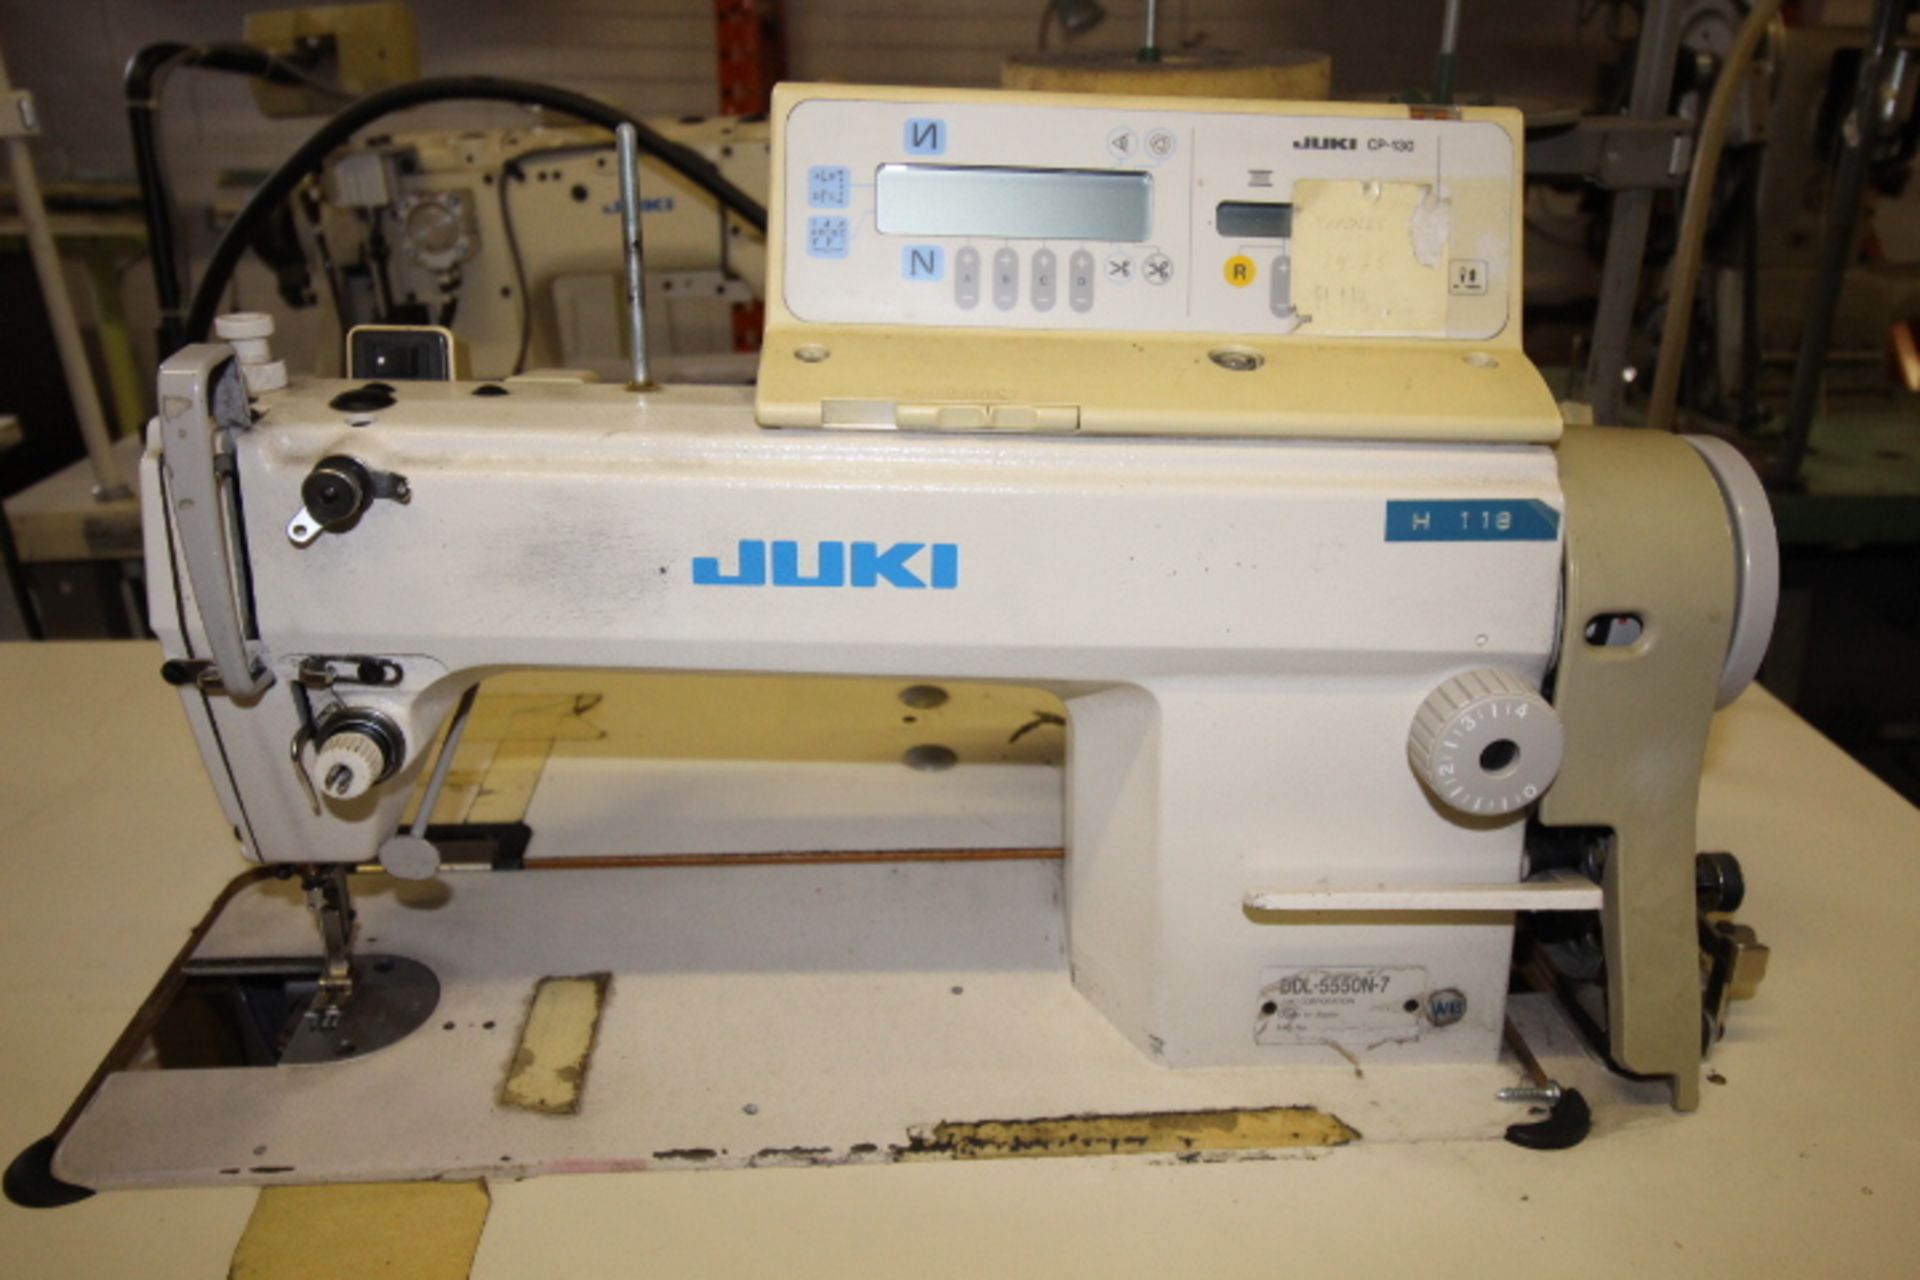 Juki Straight Stitch Sewing Machine 3phase Missing Parts (eletrical panel), M#DDL 5550N7 - Image 2 of 3